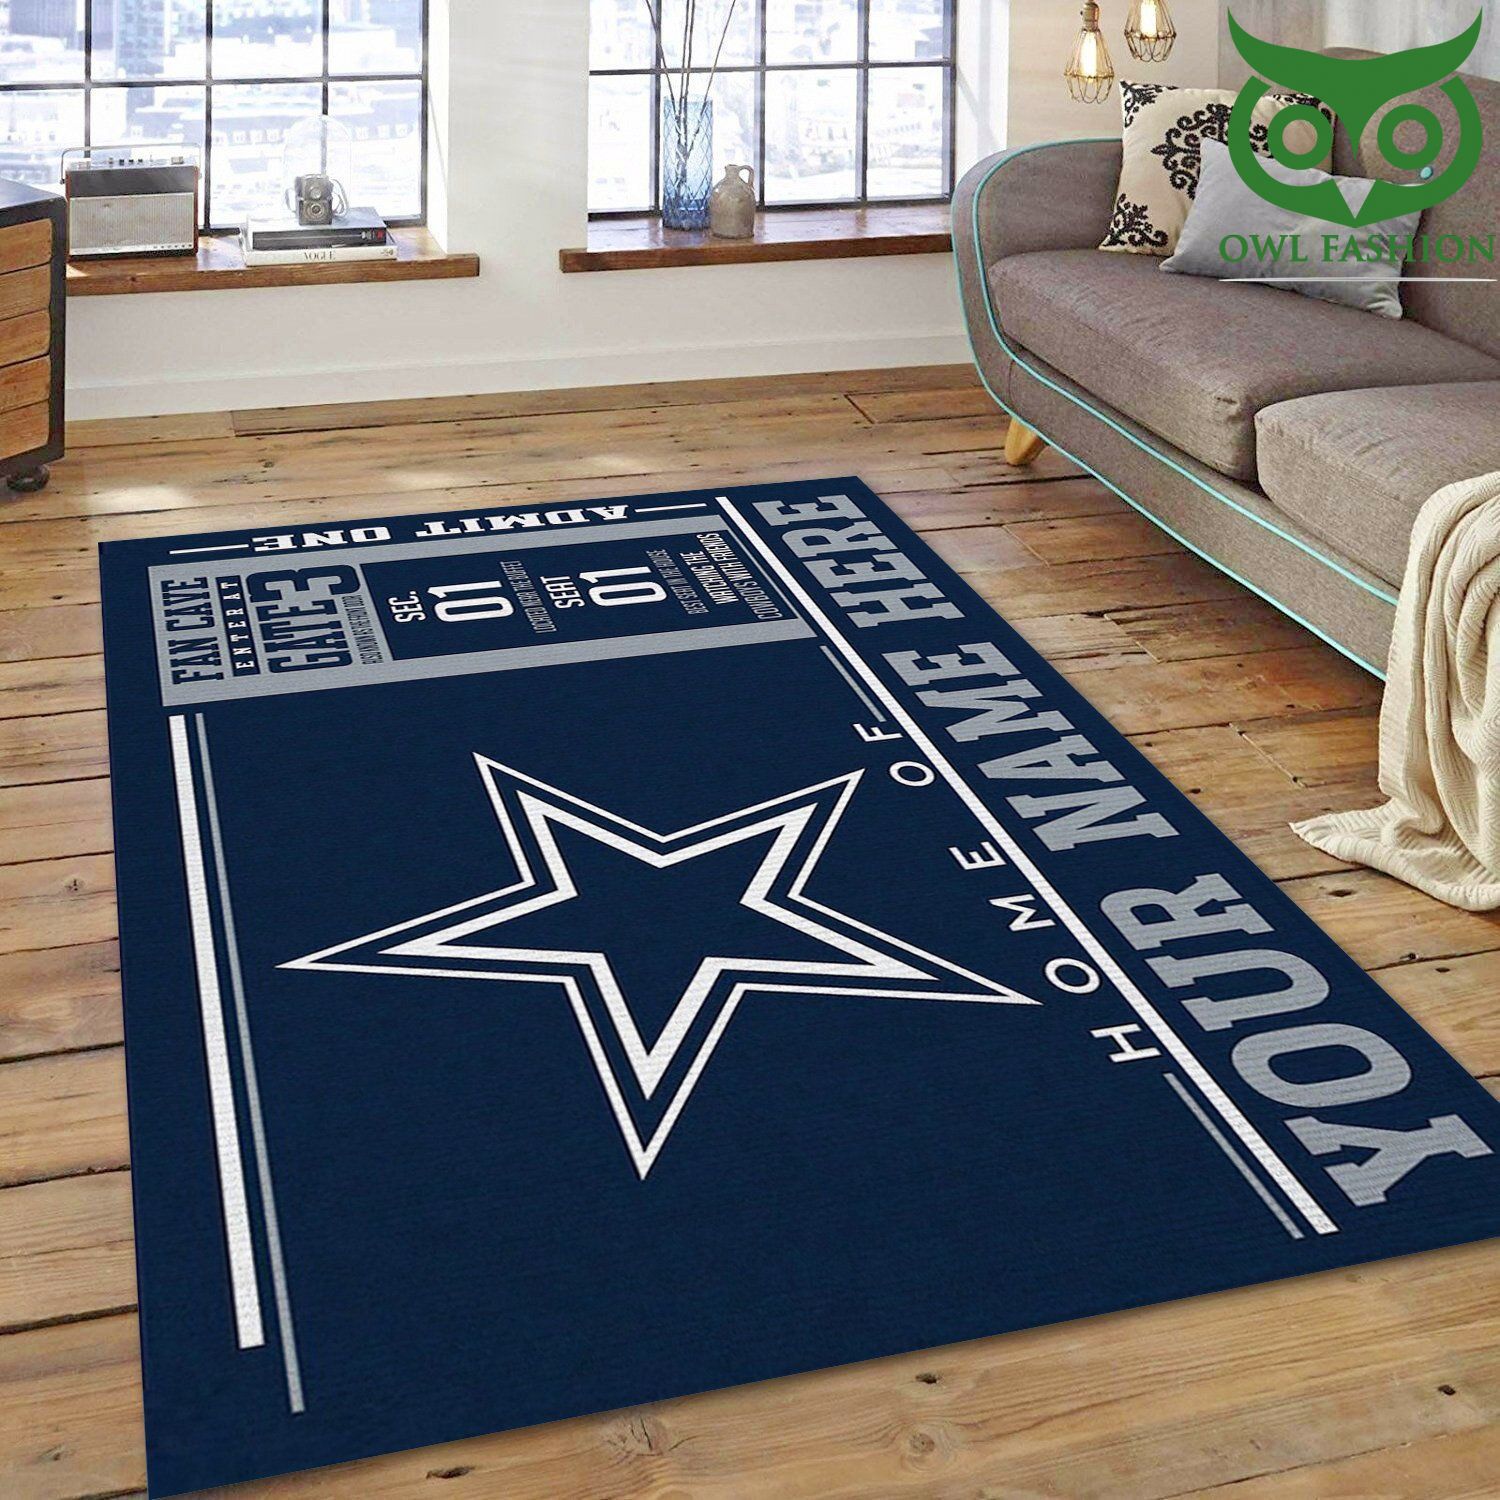 Dallas Cowboys Wincraft Personalized Nfl Area carpet rug Home and floor Decoration